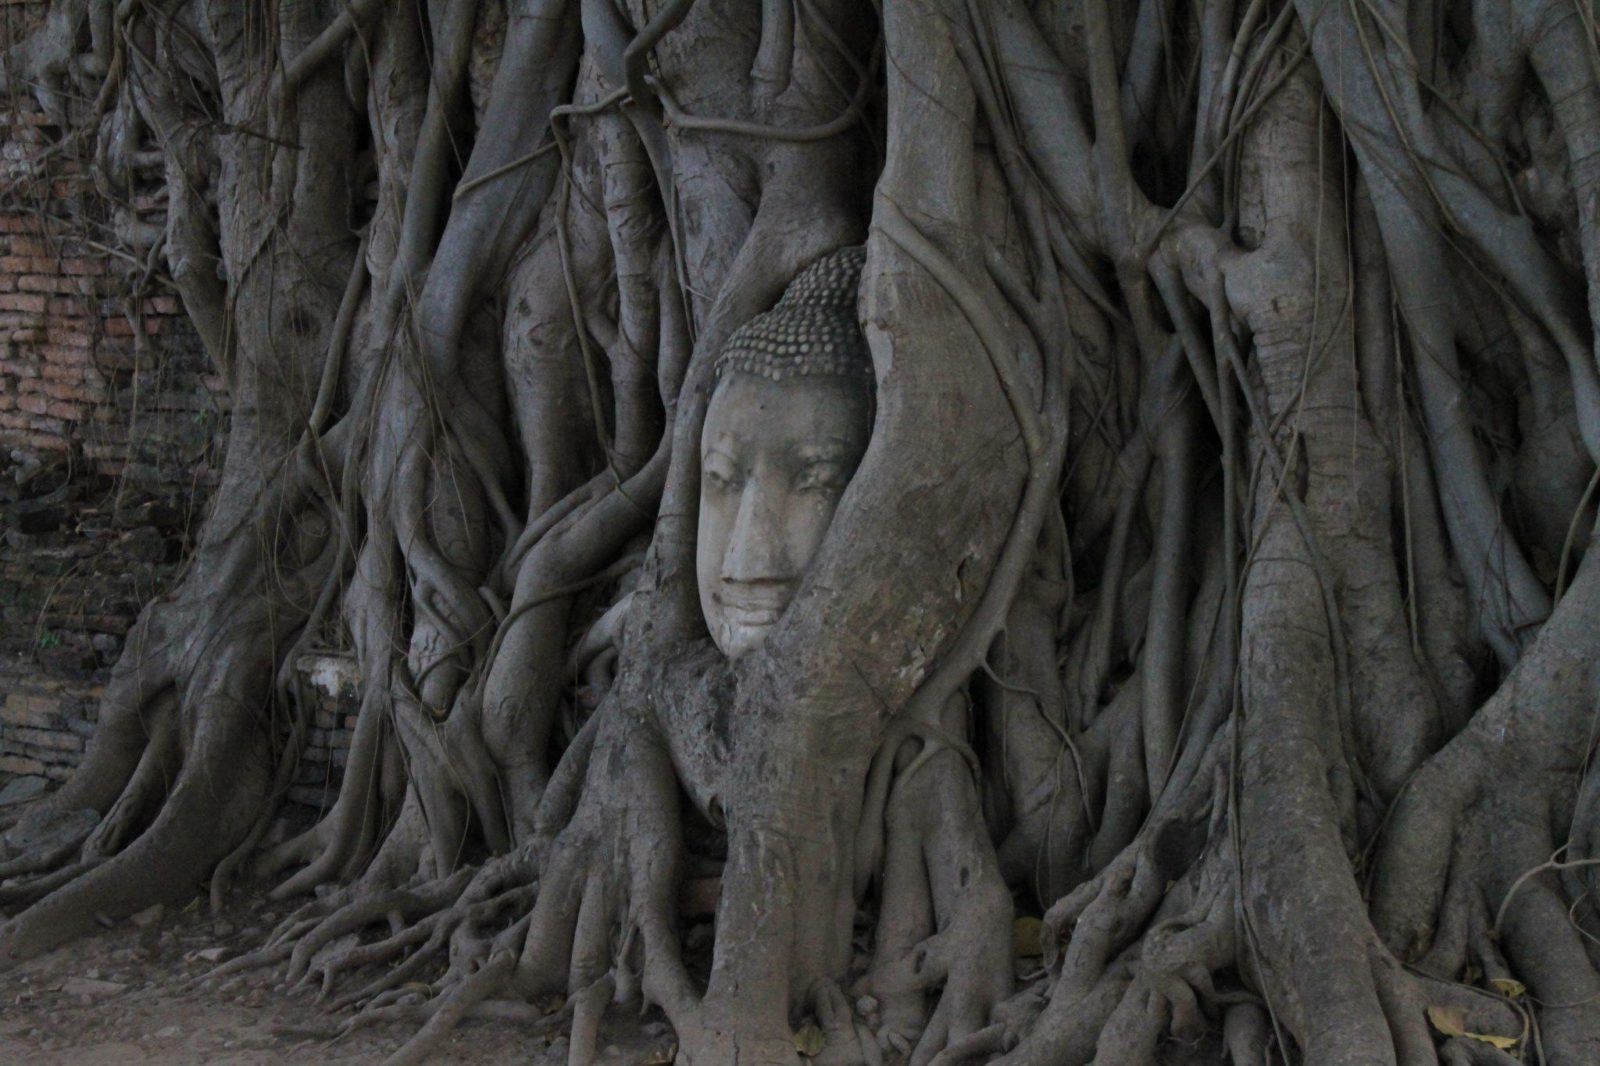 Buddha’s, Temples and Bicycle Rides – what you need to know to plan your trip to Ayutthaya